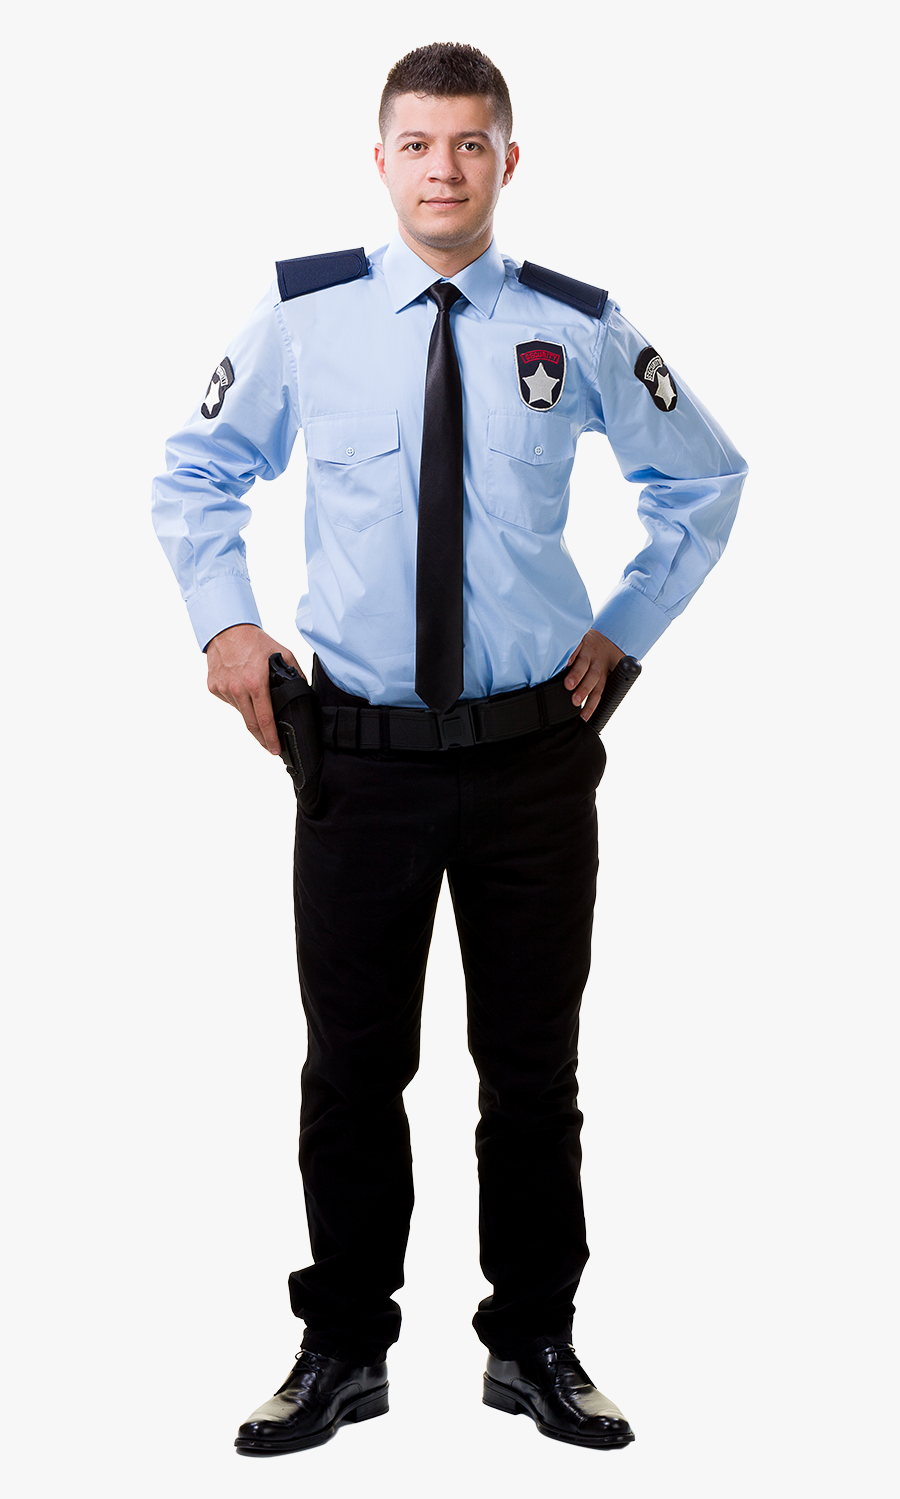 Police Officer Security Guard Uniform - Security Guard Image Download, Transparent Clipart